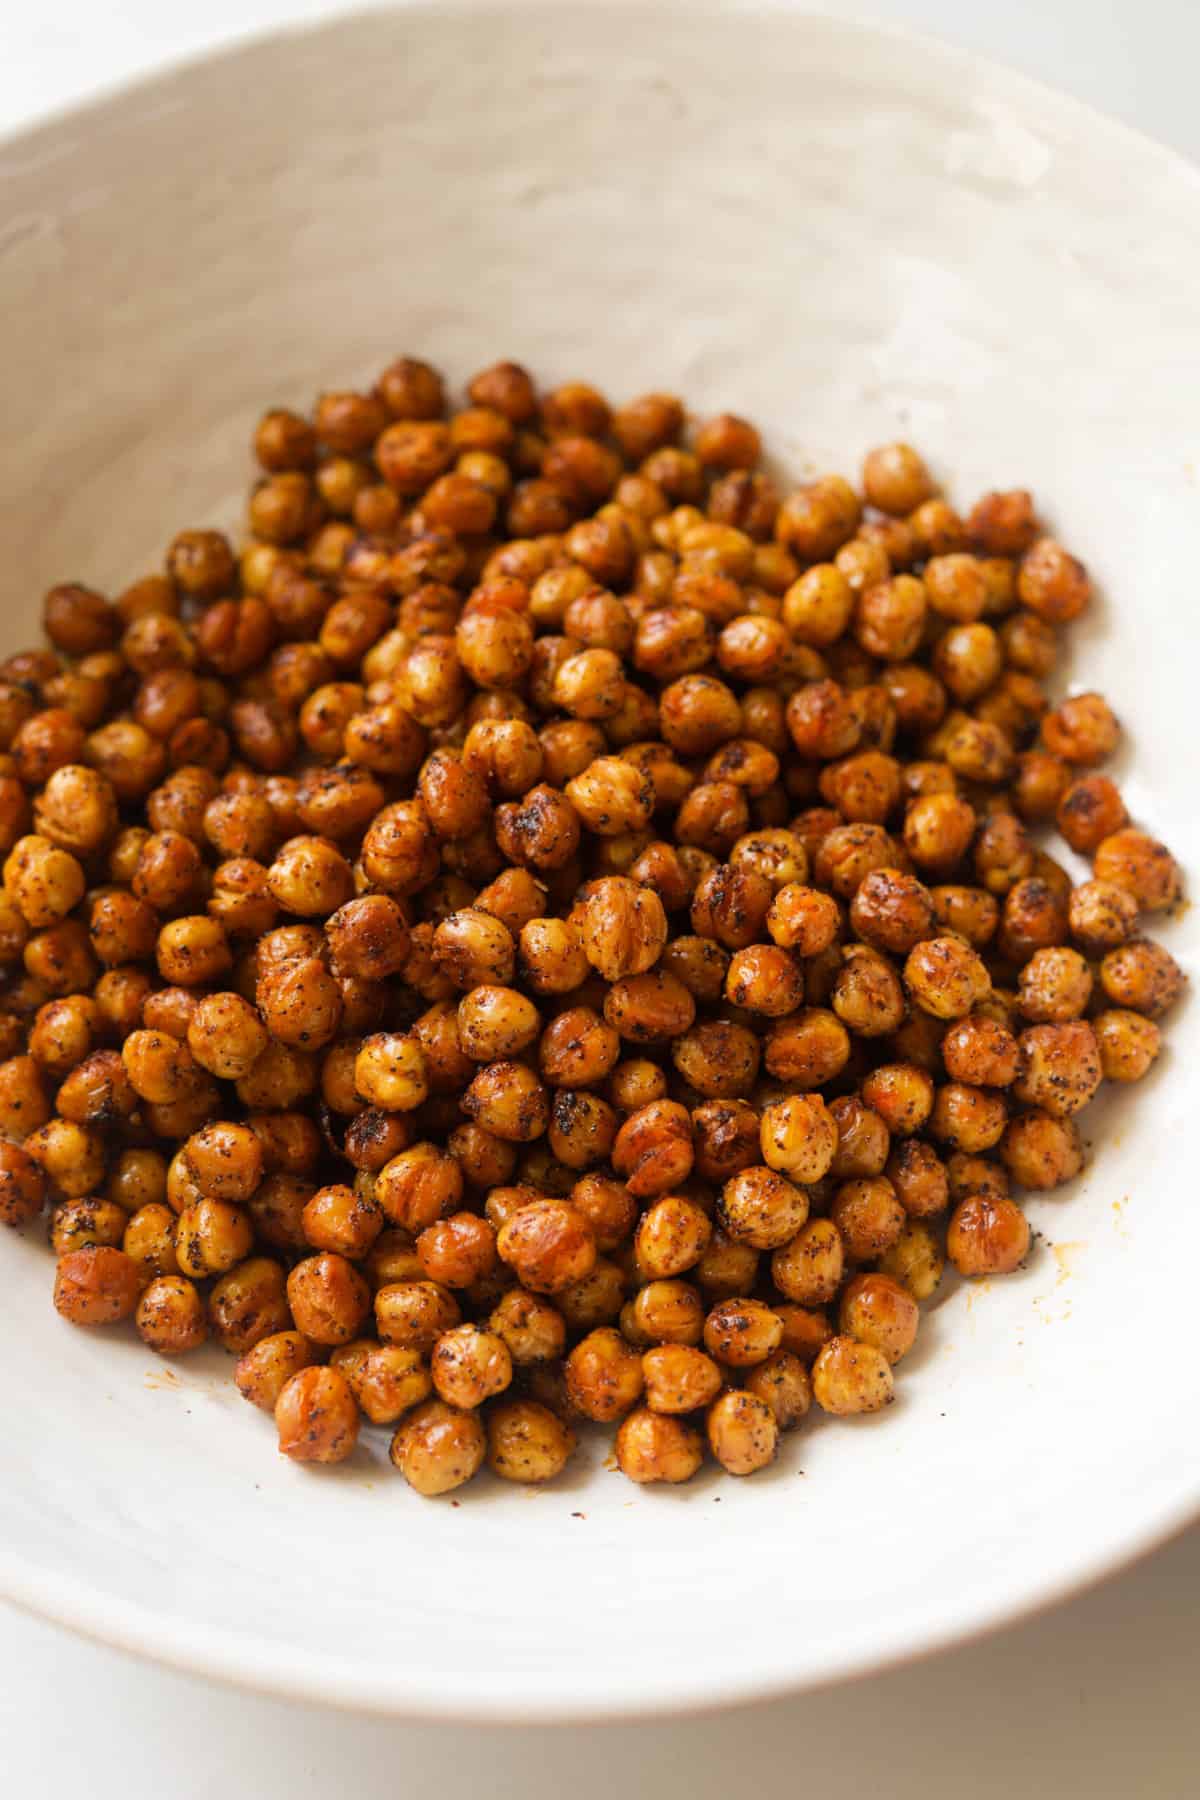 A side shot of a bowl of roasted chickpeas.